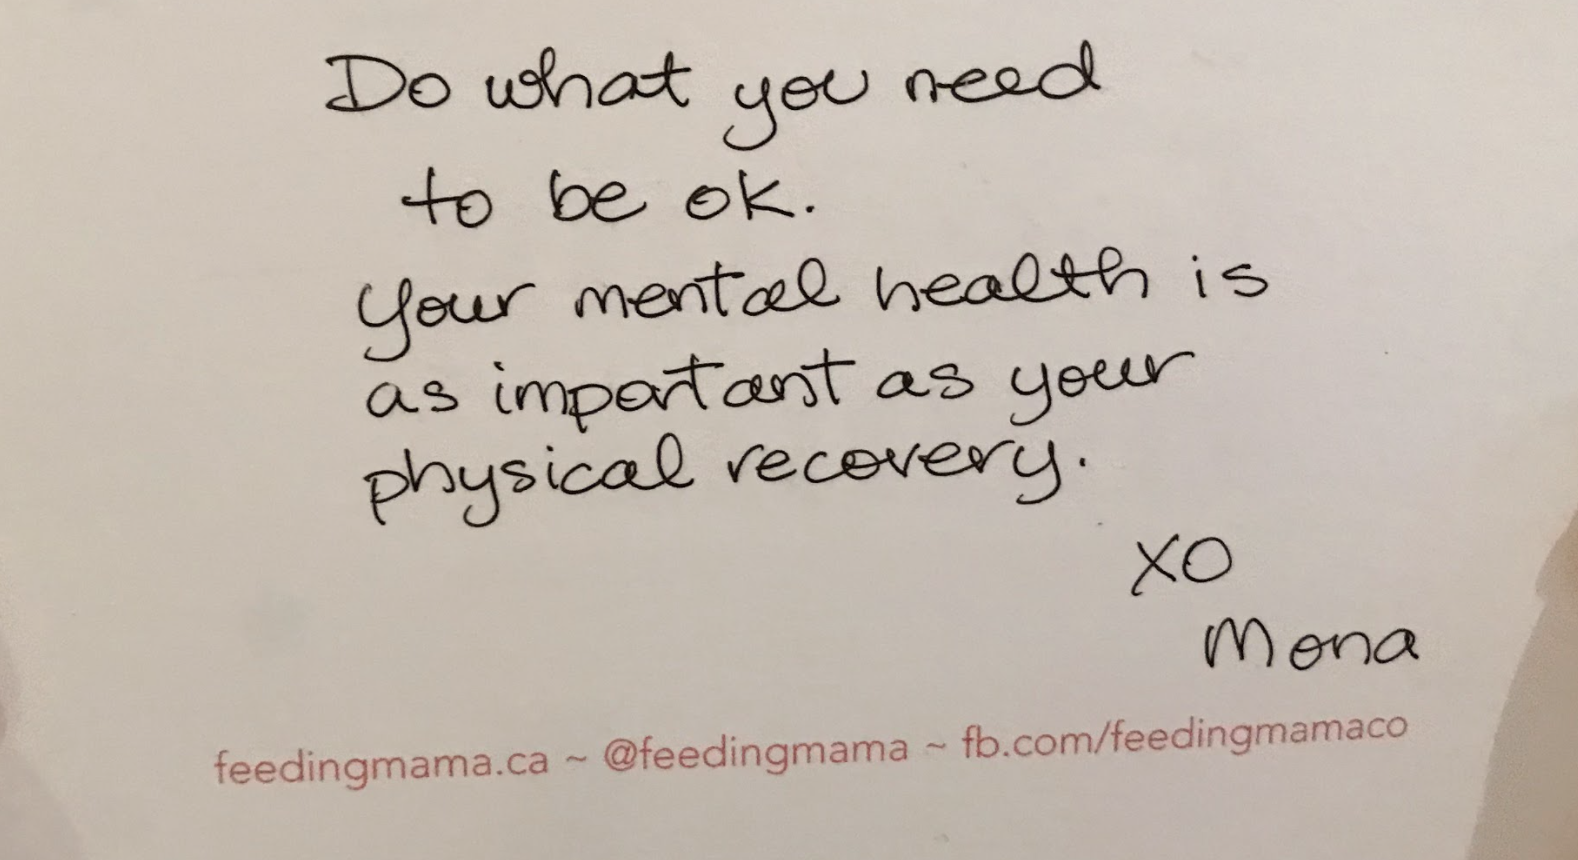 Image of a handwritten note from Feeding Mama to customers receiving meal deliveries. The note reads "Do what you need to be ok. Your mental health is as important as your physical recovery. XO, Mona"